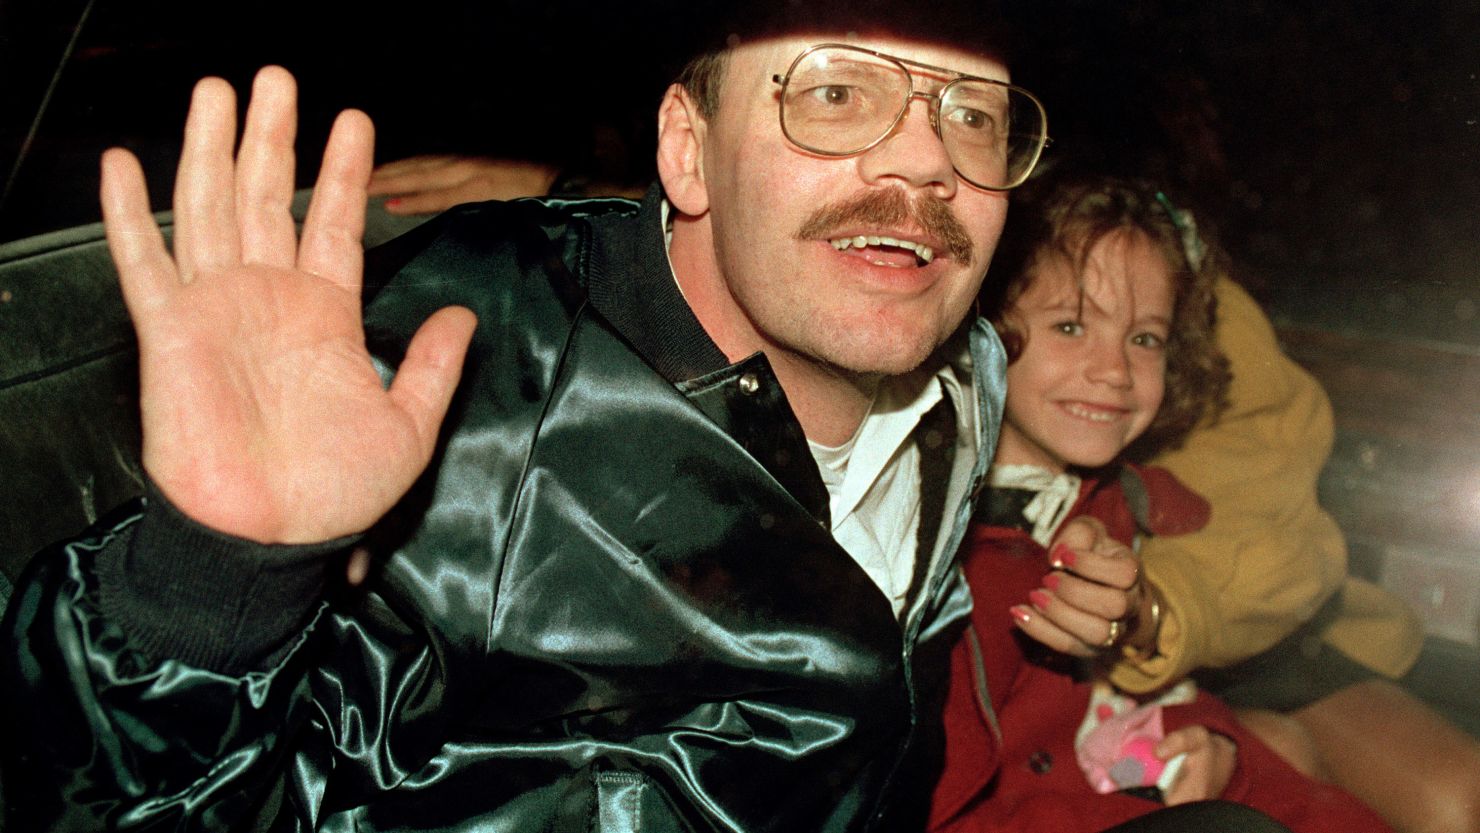 Terry Anderson, who was the longest held American hostage in Lebanon, grins with his 6-year-old daughter Sulome, on Dec. 4, 1991, as they leave the US Ambassador's residence in Damascus, Syria, following Anderson's release.